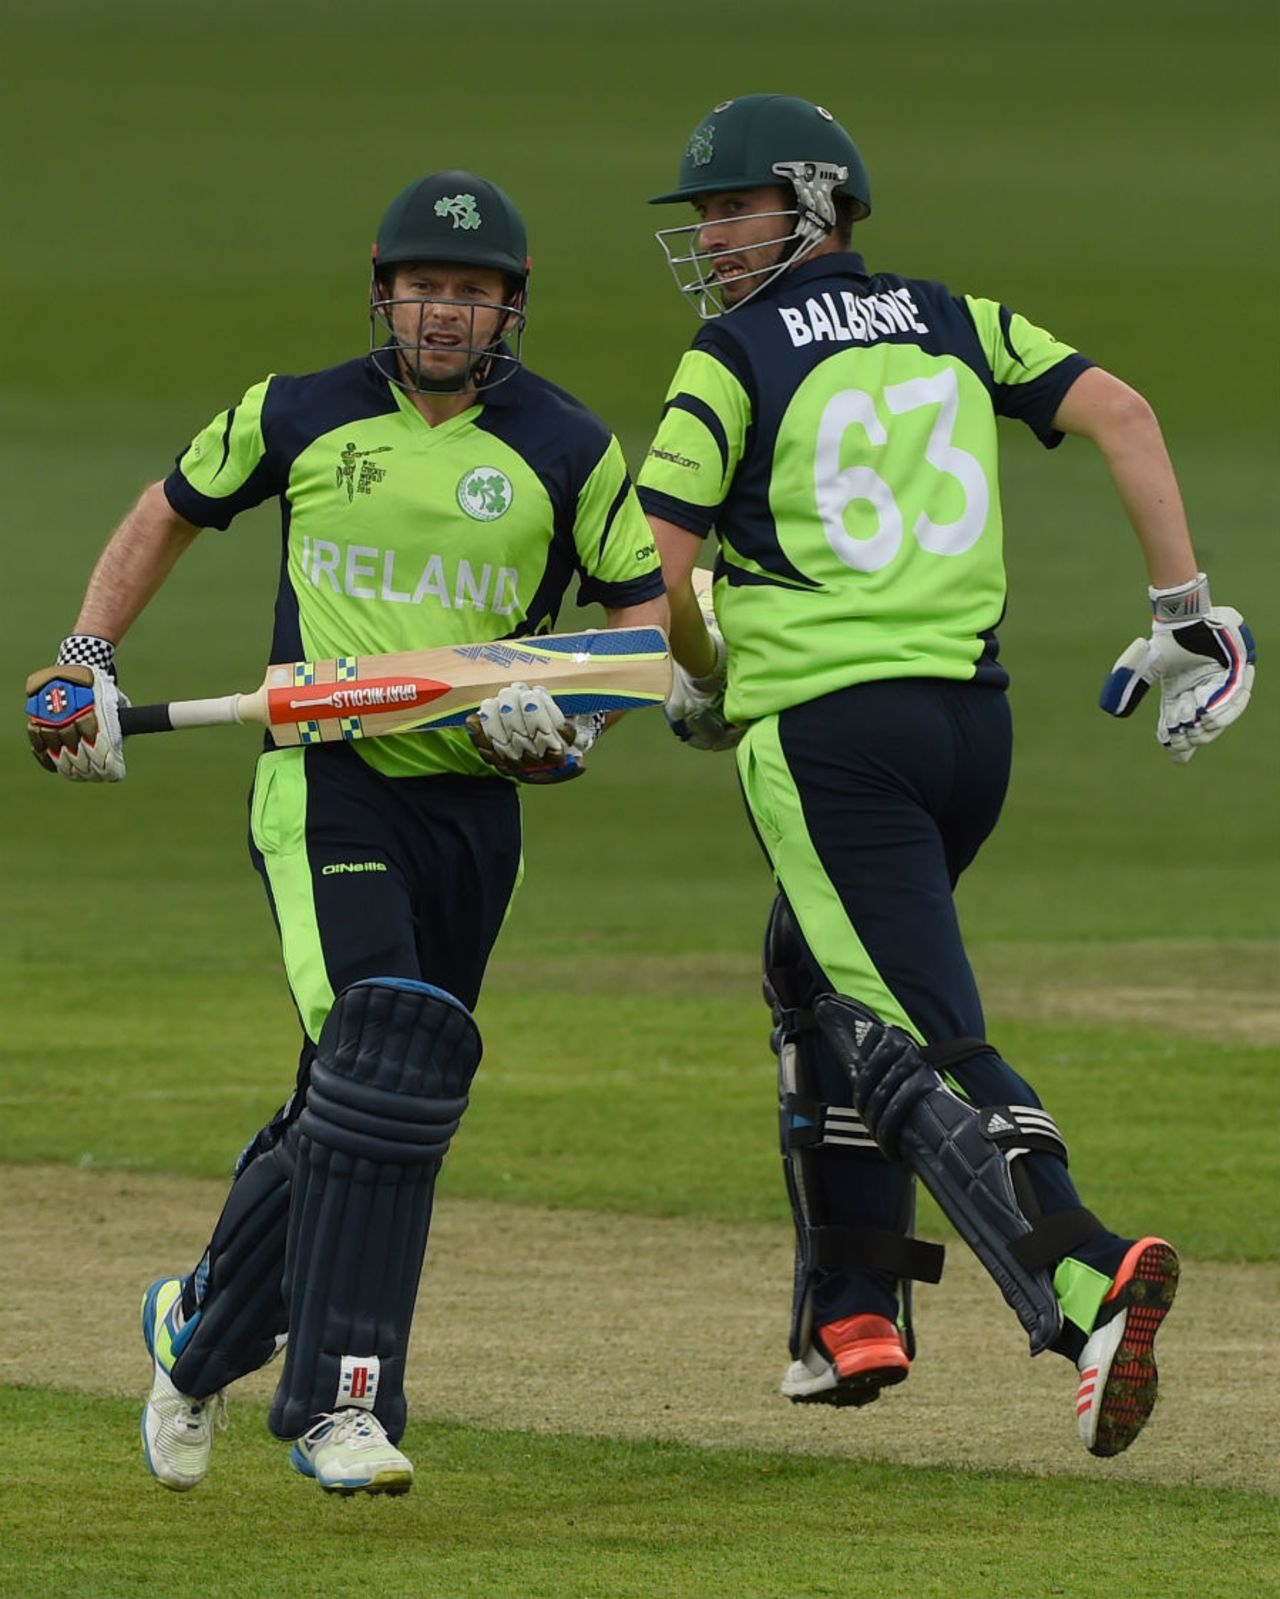 Ed Joyce and Andrew Balbirnie put on 138 for third wicket, Ireland v Zimbabwe, World Cup 2015, Group B, Hobart, March 7, 2015